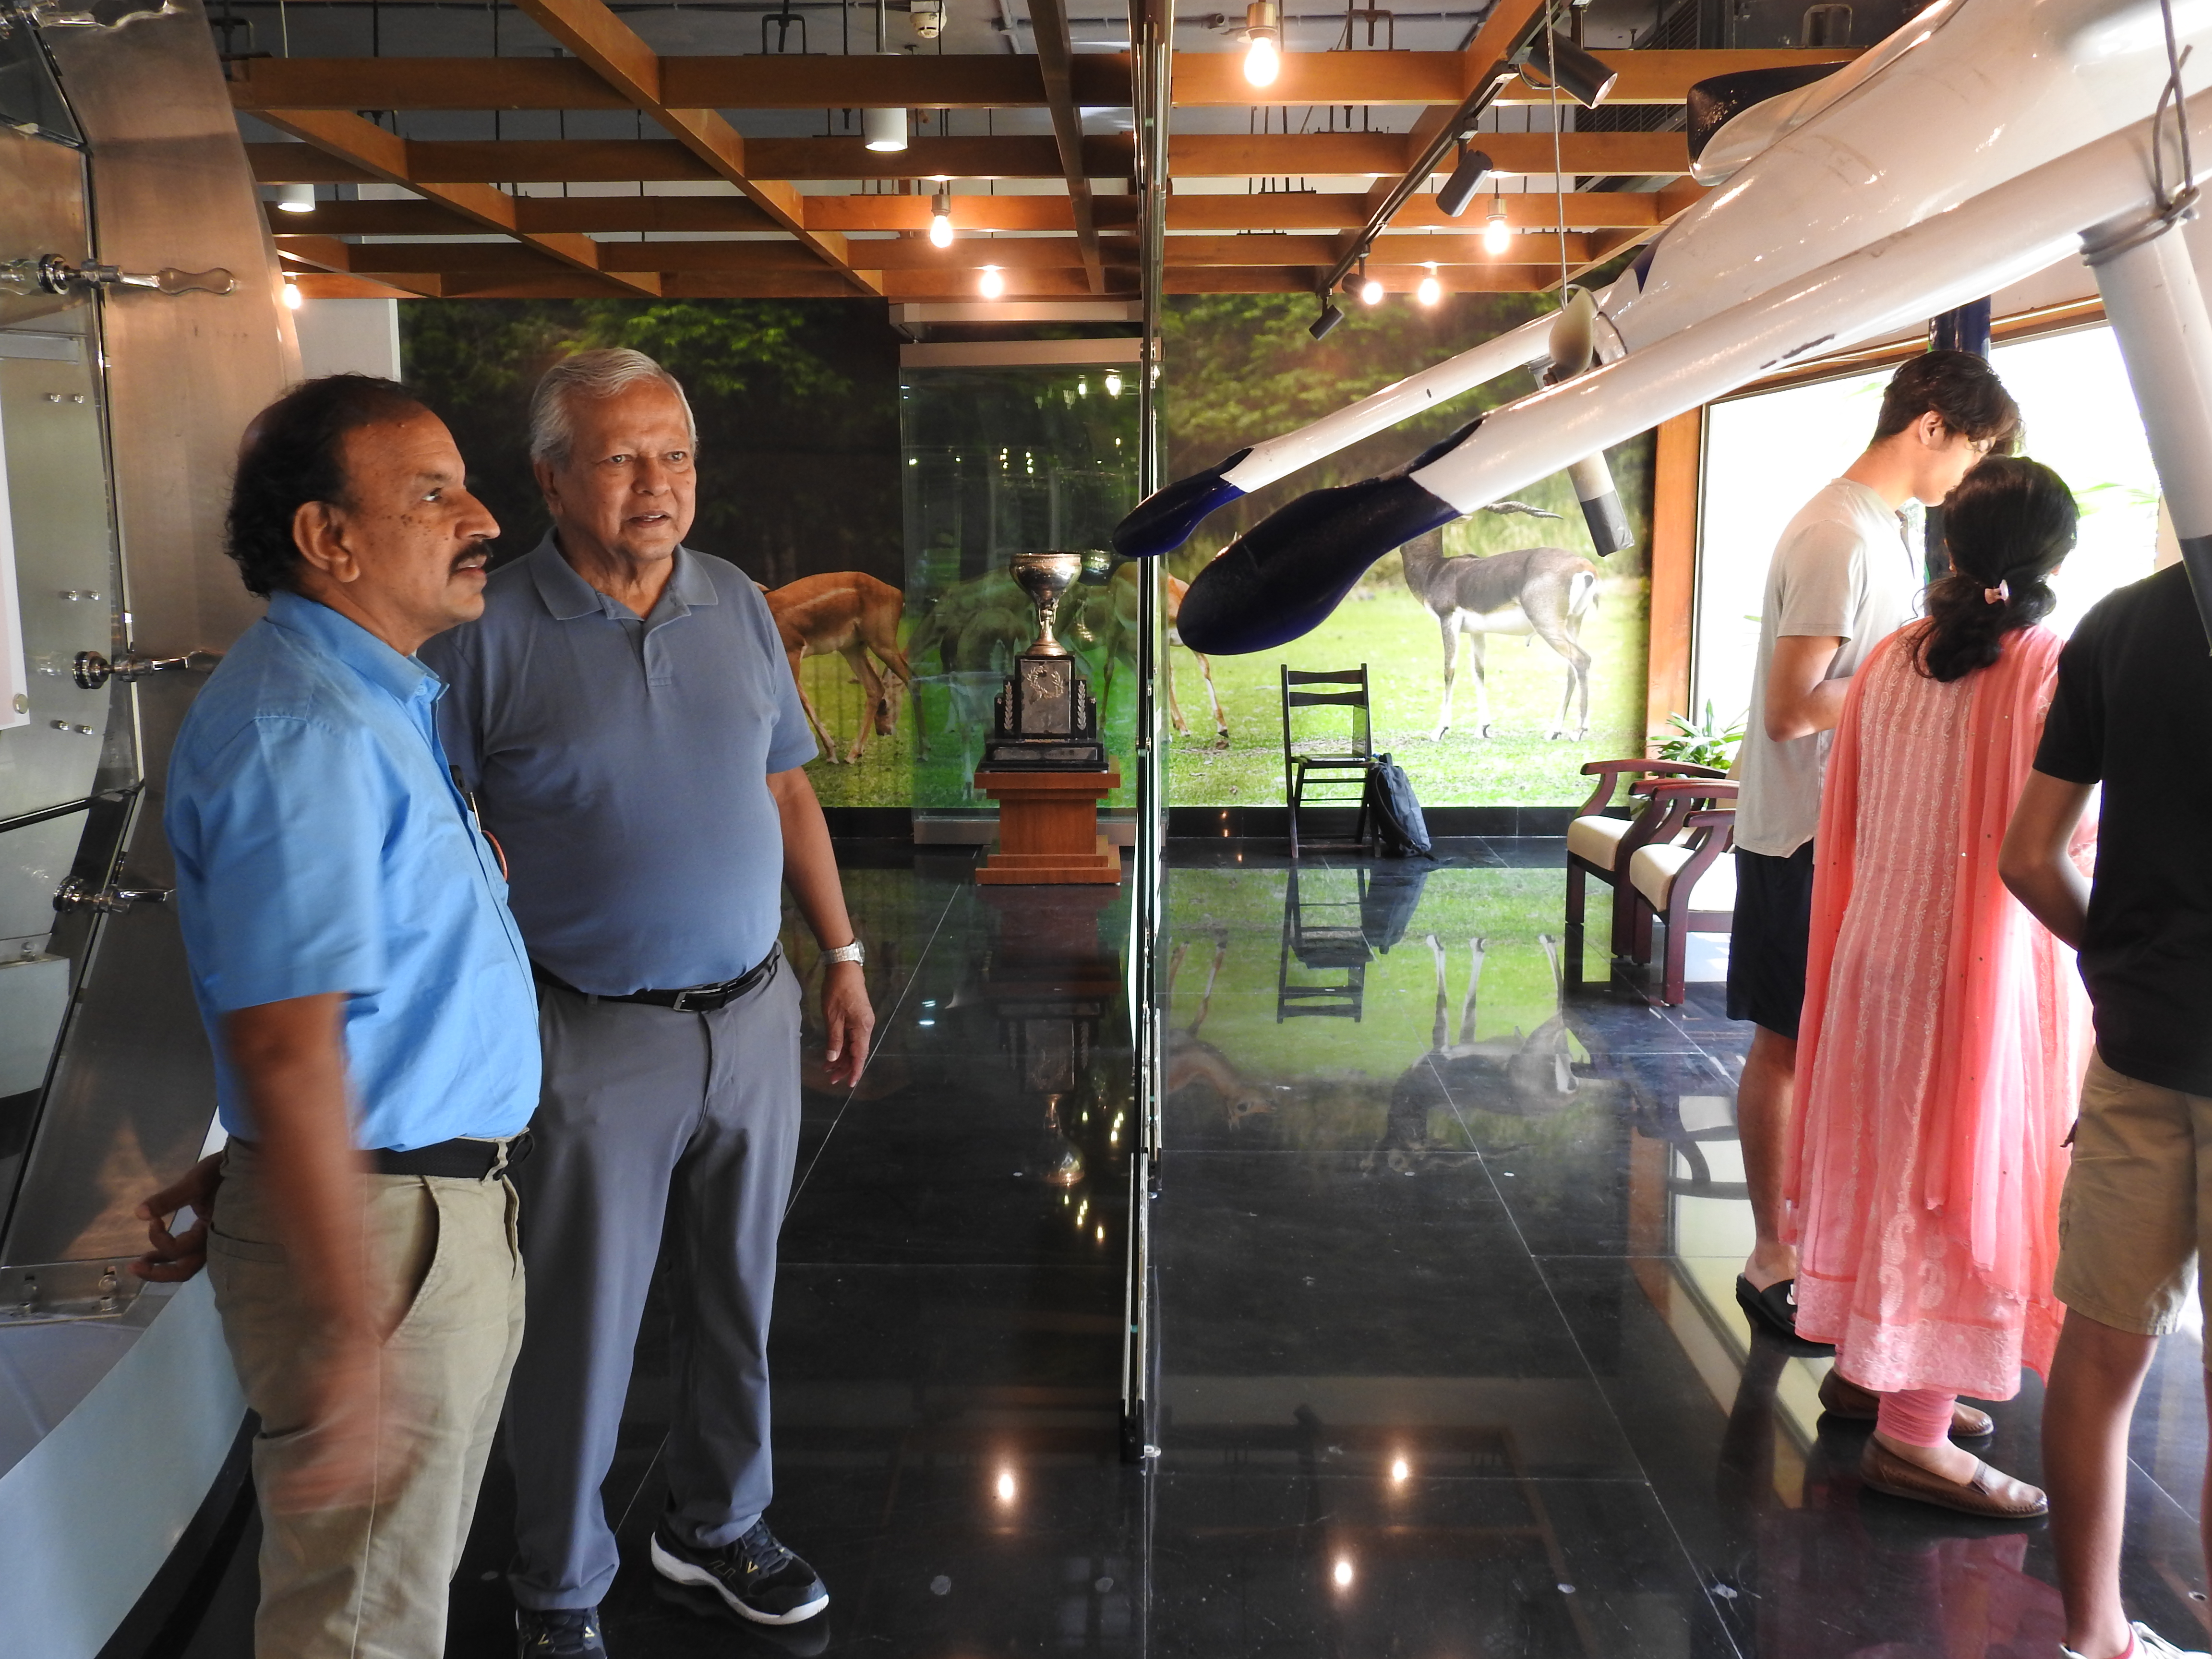 Mr. Kumaran Sathasivam and Mr. Lionel Paul taking a look at an exhibit at the Heritage Centre.